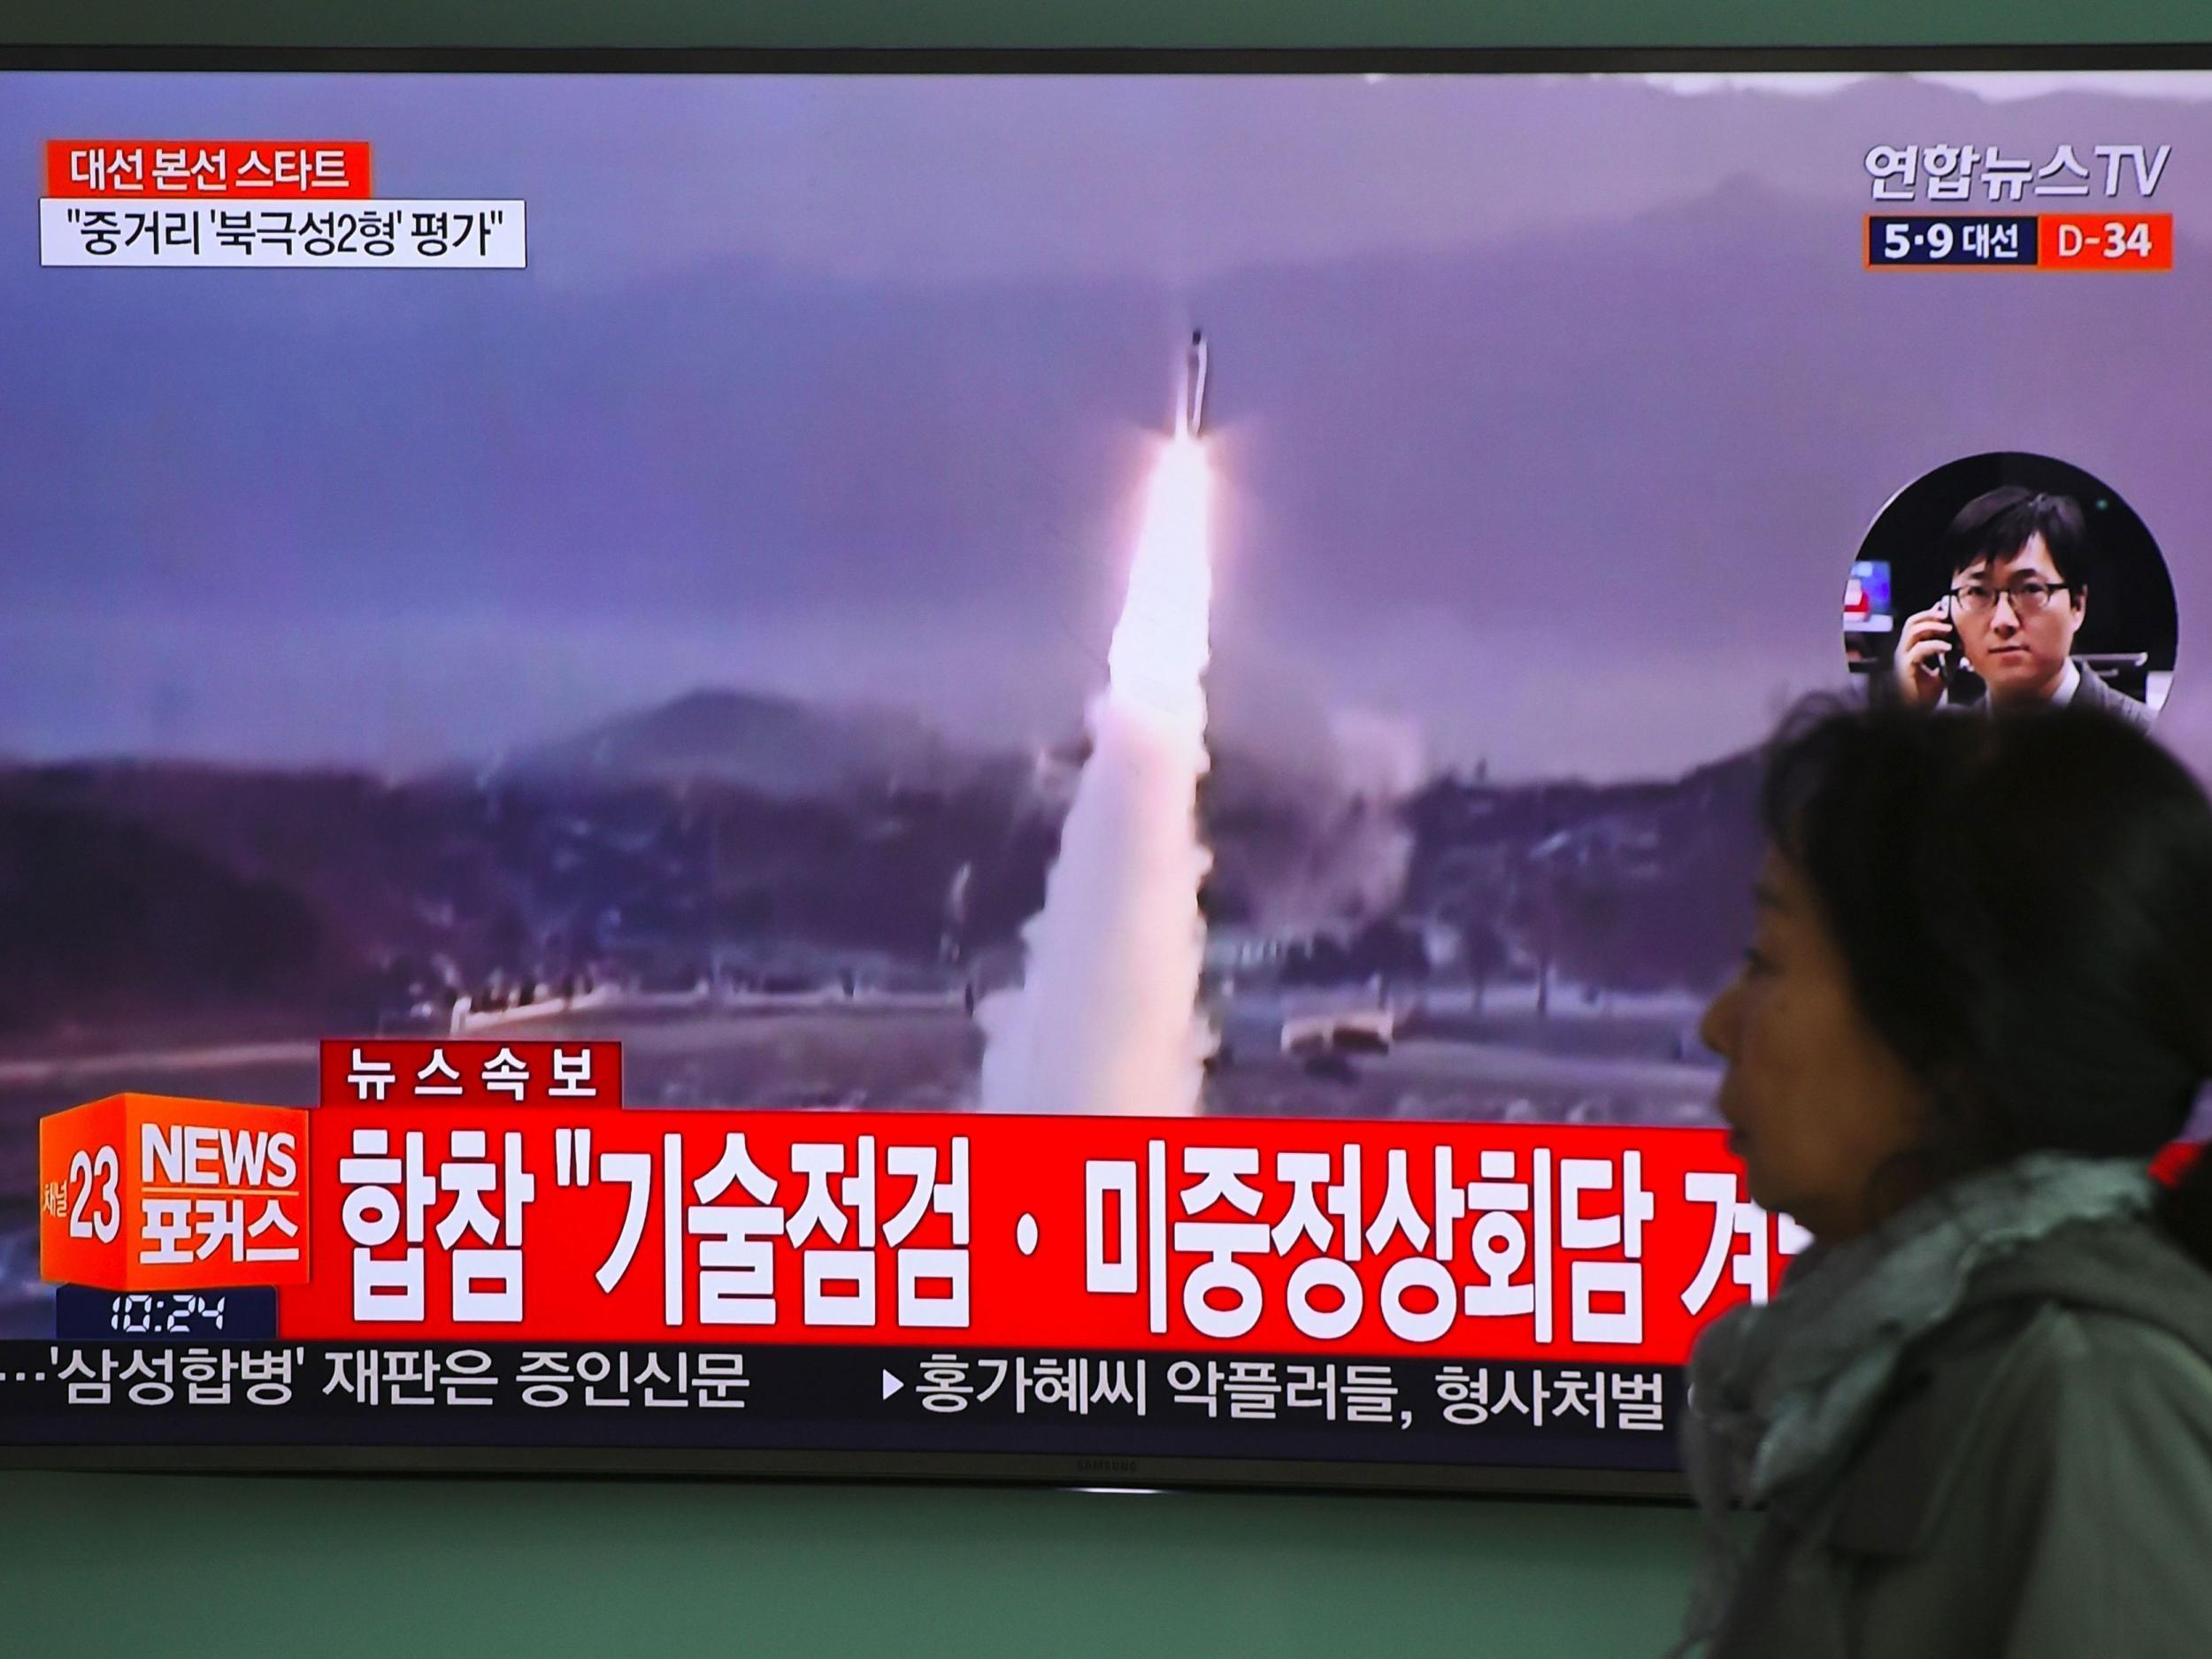 A woman in Seoul walks past a television screen showing file footage of a North Korean missile launch on the day of the failed test